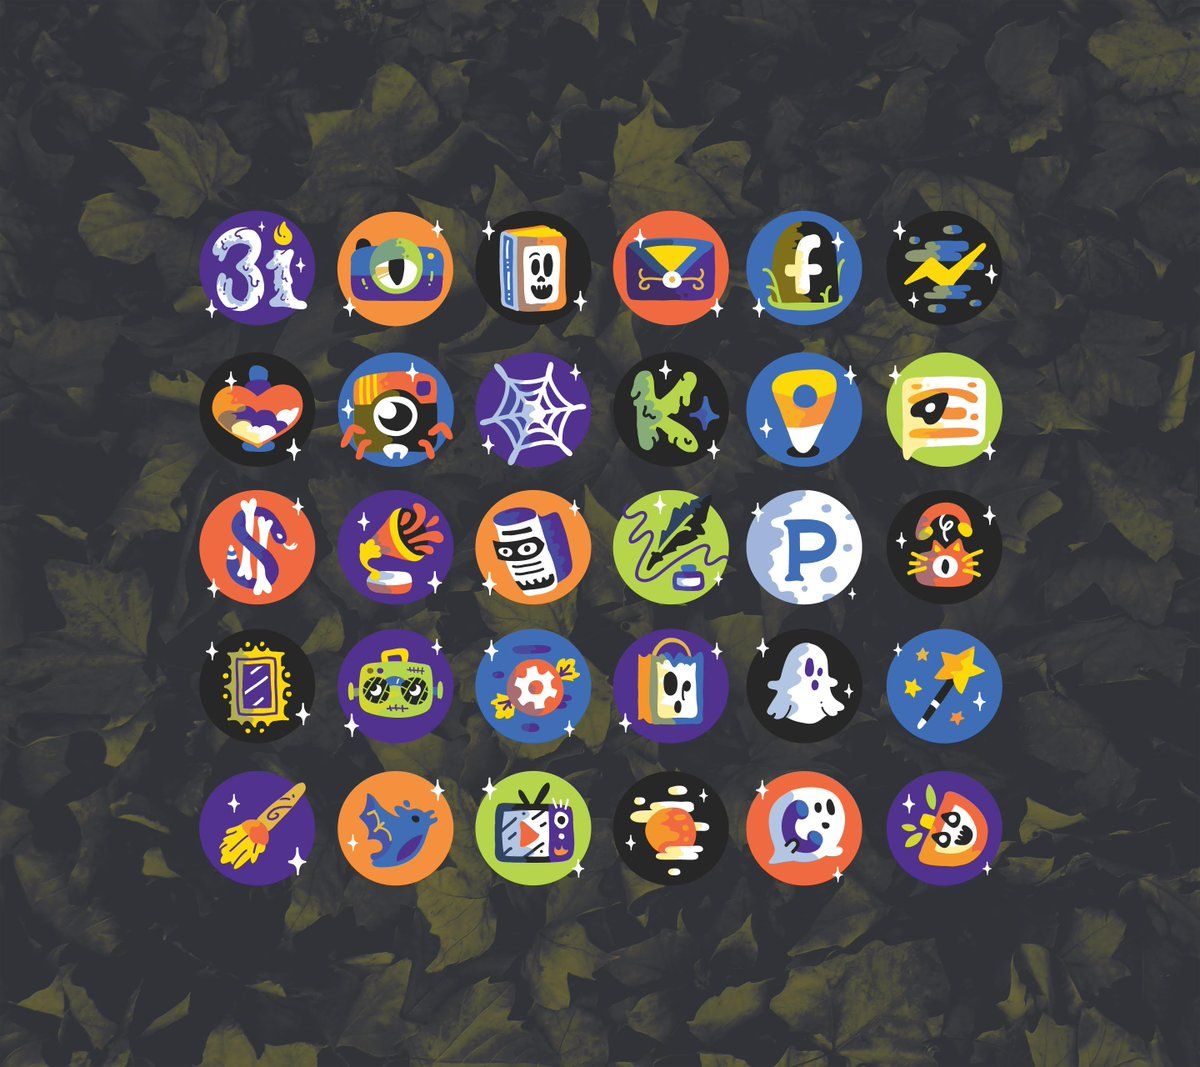 ZEDGE Zedgers! Here are what you're asking for - #Halloween Icon and Wallpaper! Download today! #ZedgeIcon